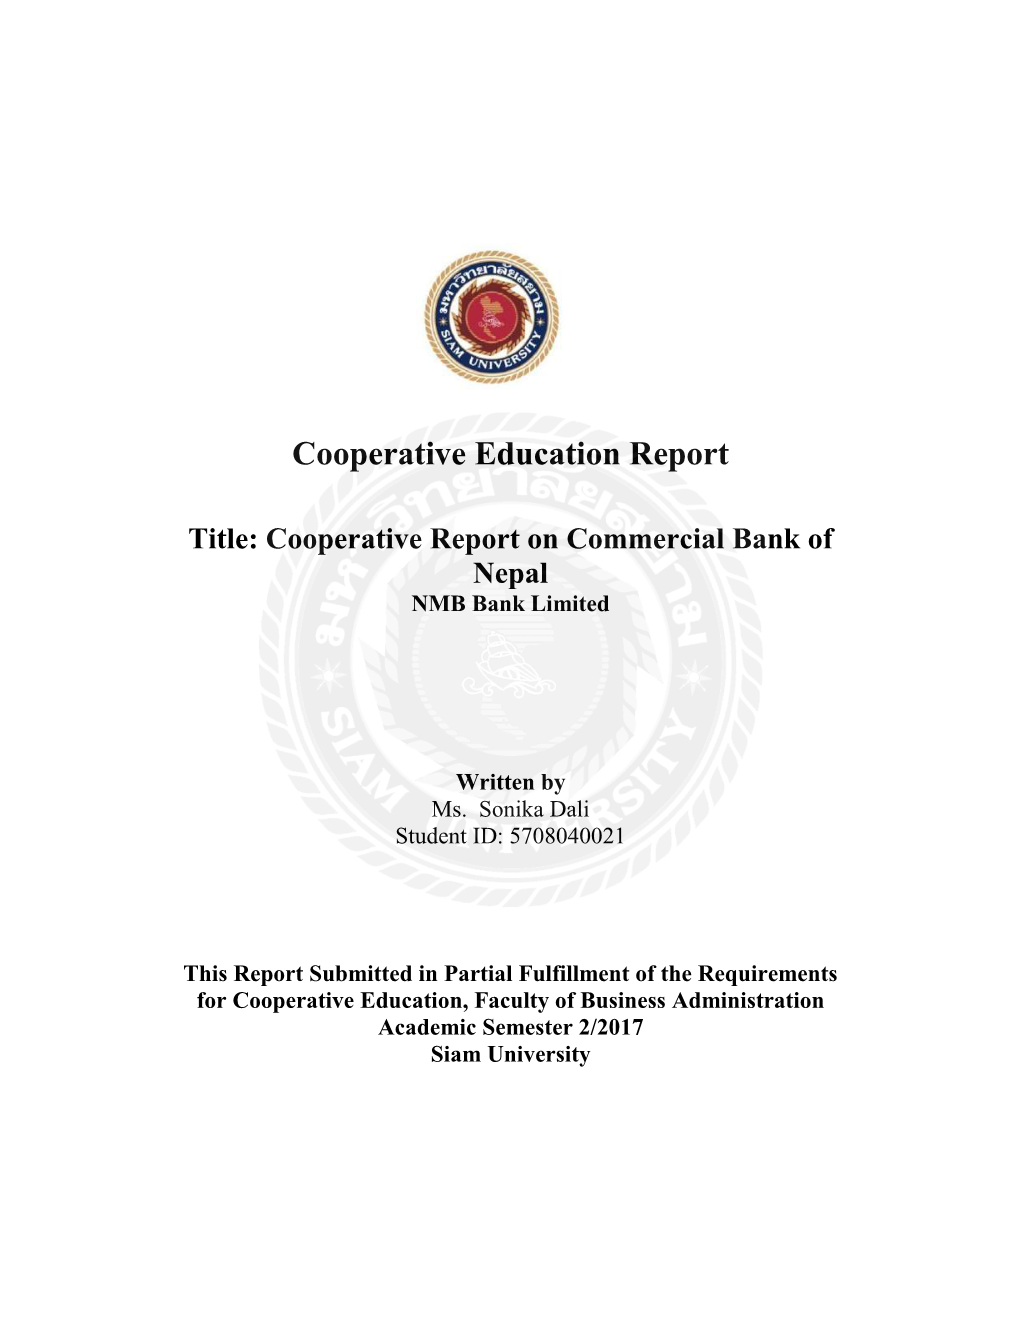 Cooperative Education Report Title: Cooperative Report on Commercial Bank of Nepal